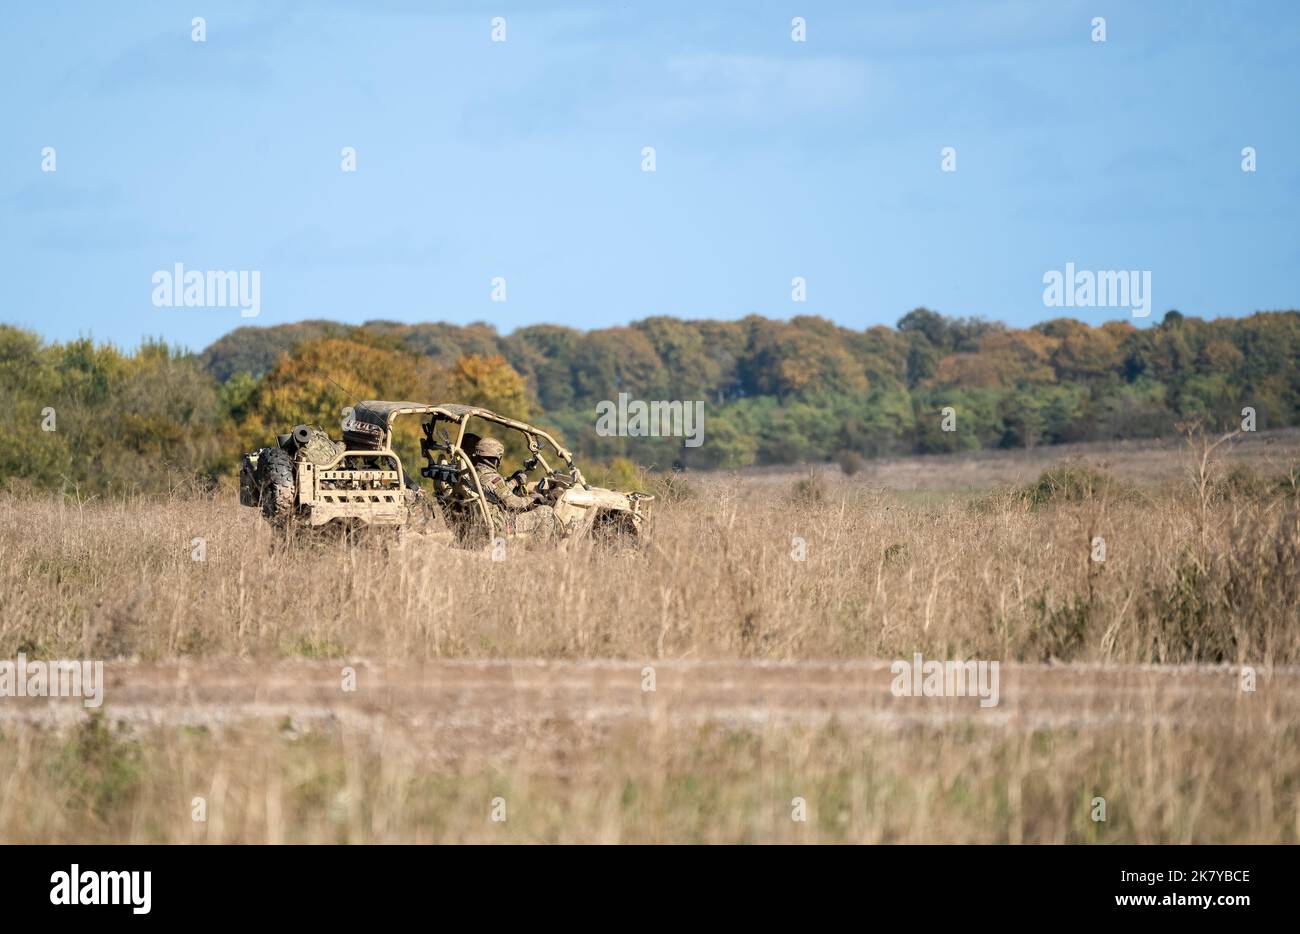 Polaris MRZR-D4 UTV (utility task vehicle) carrying soldiers from 40 Commando Royal Marines on a military exercise, Wiltshire UK Stock Photo